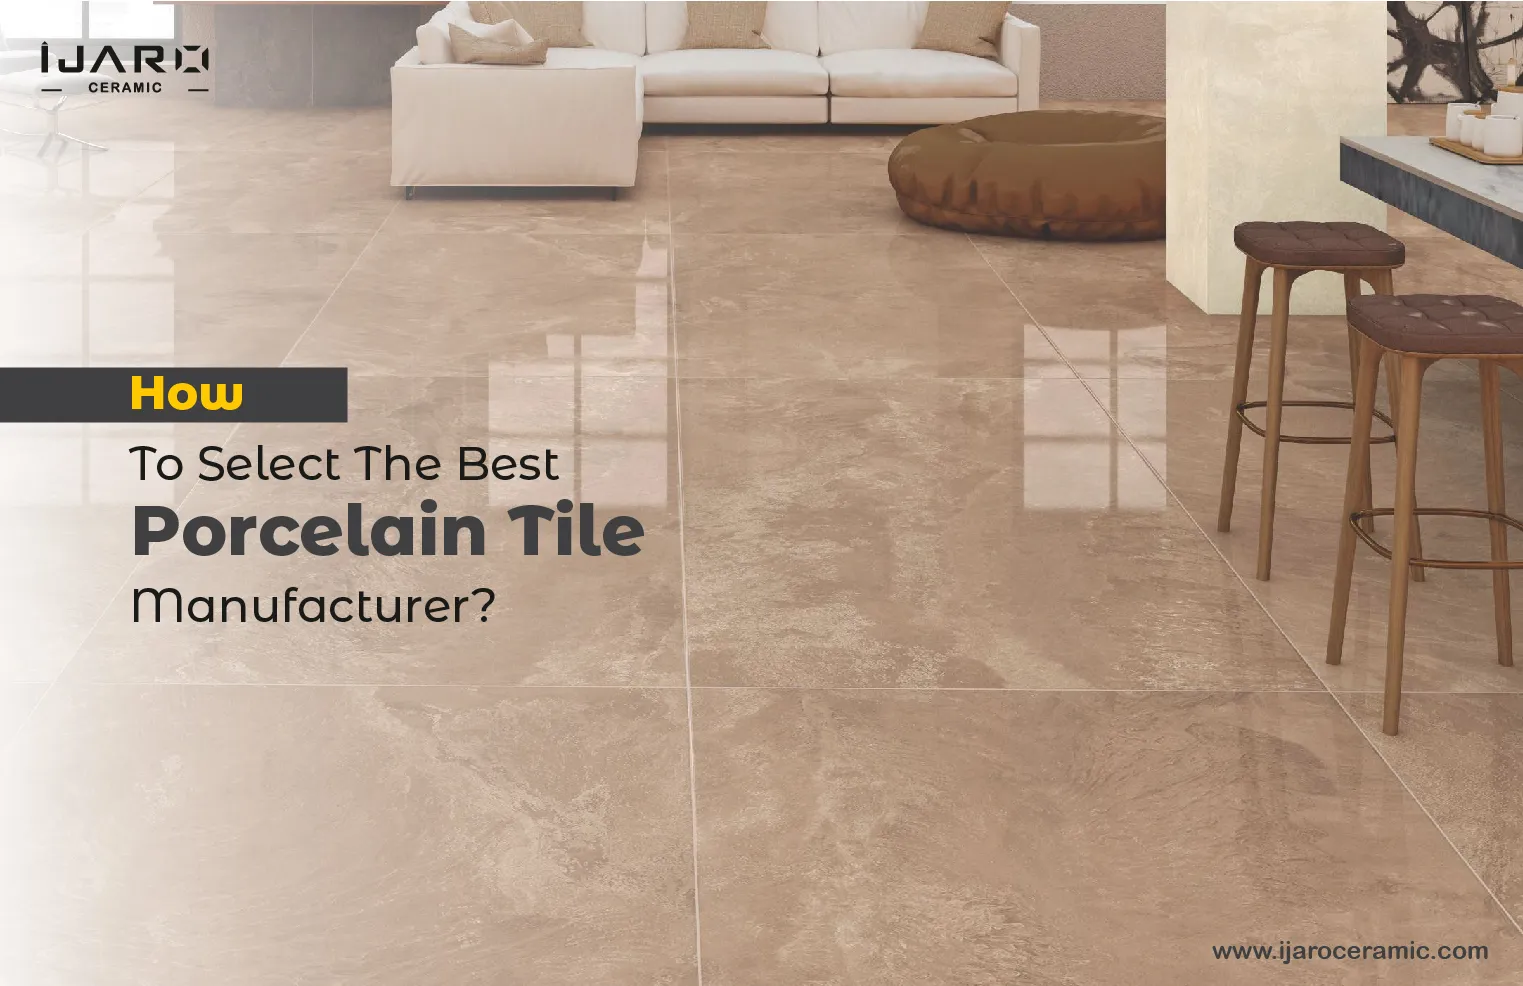  How To Select The Best Porcelain Tile Manufacturer?